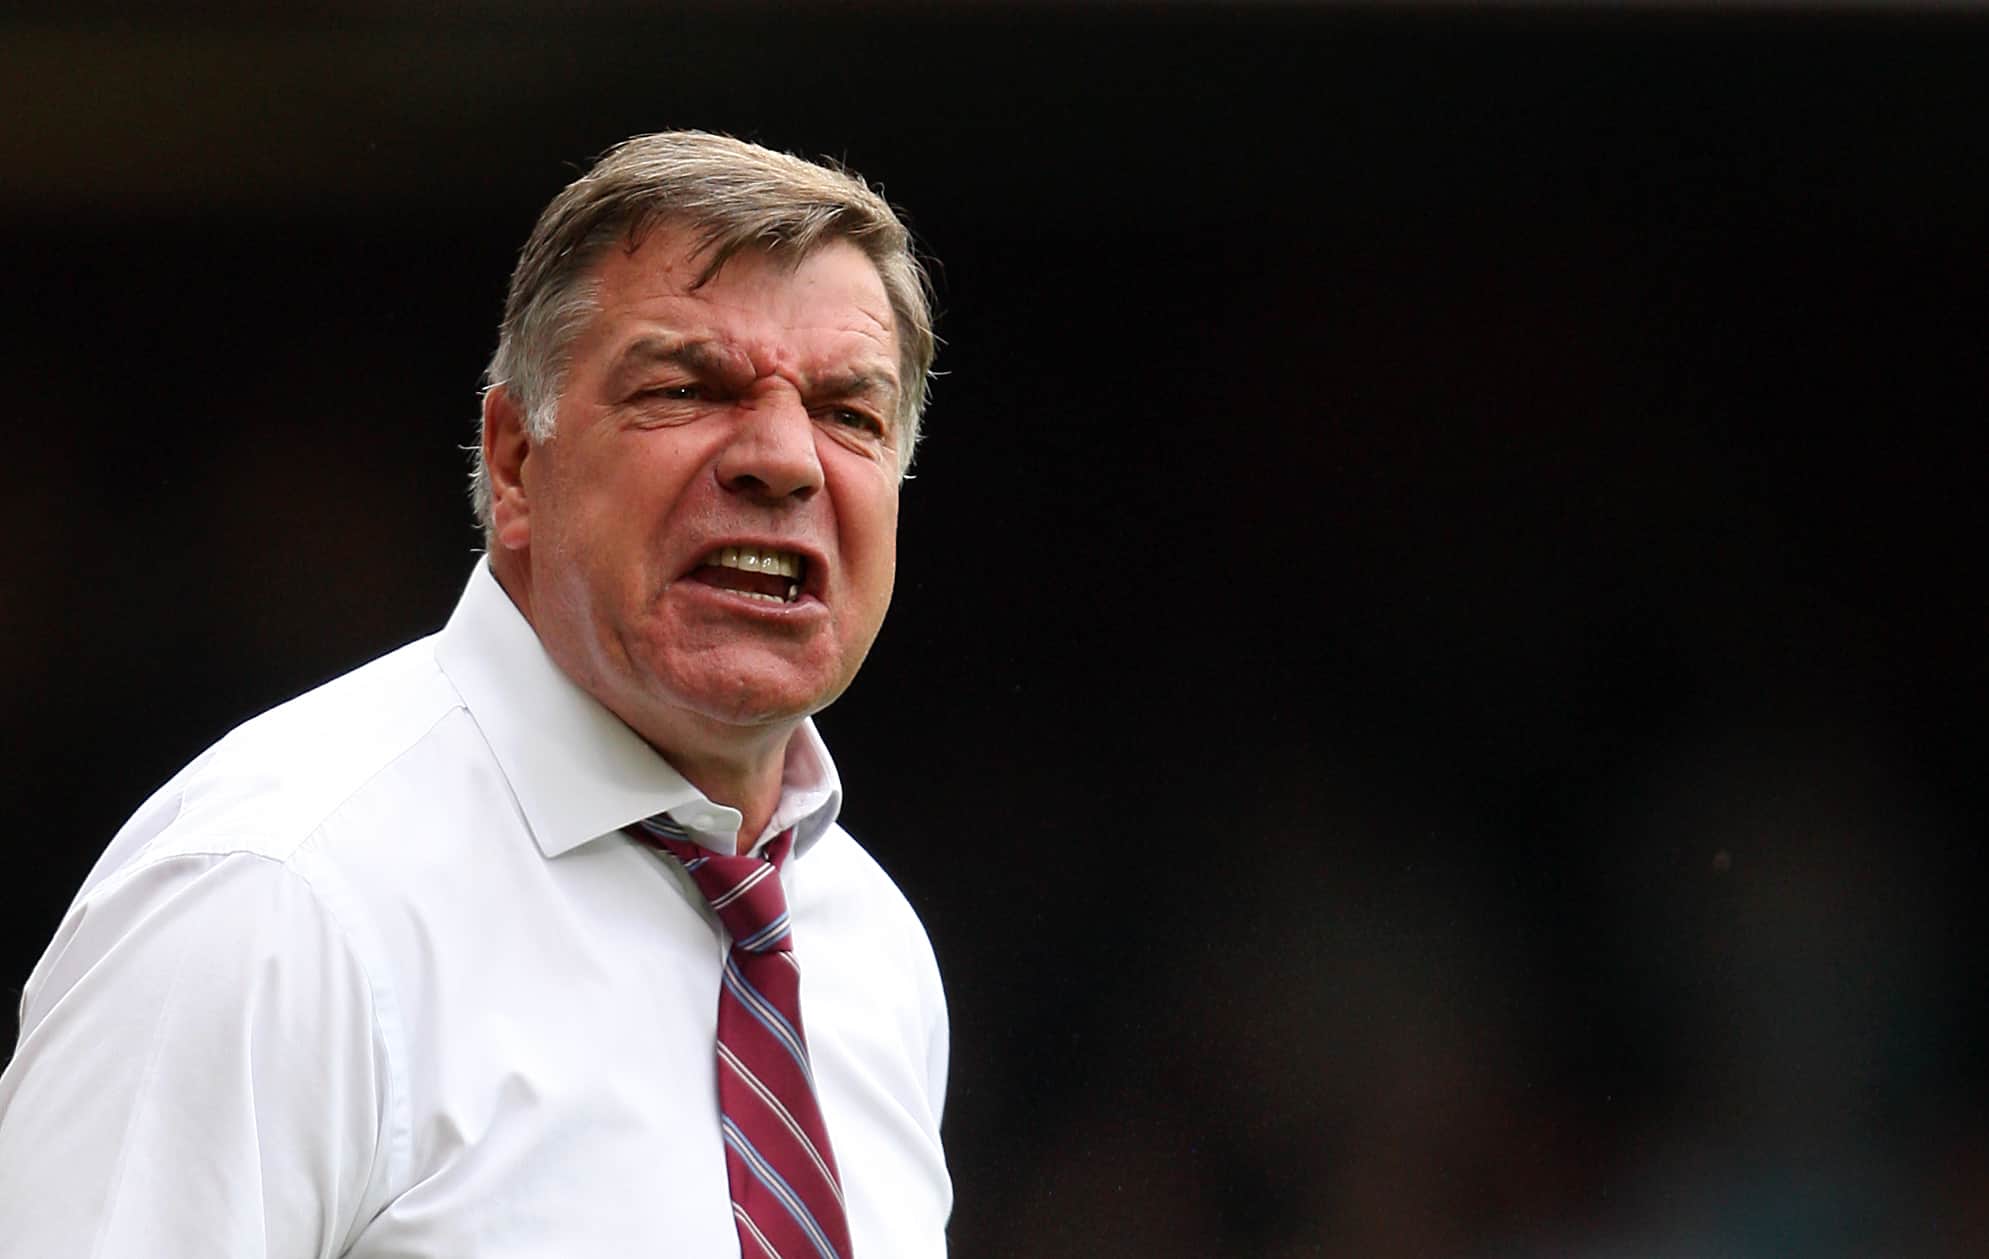 Leave-voting Sam Allardyce bemoans Brexit curbs on foreign signings